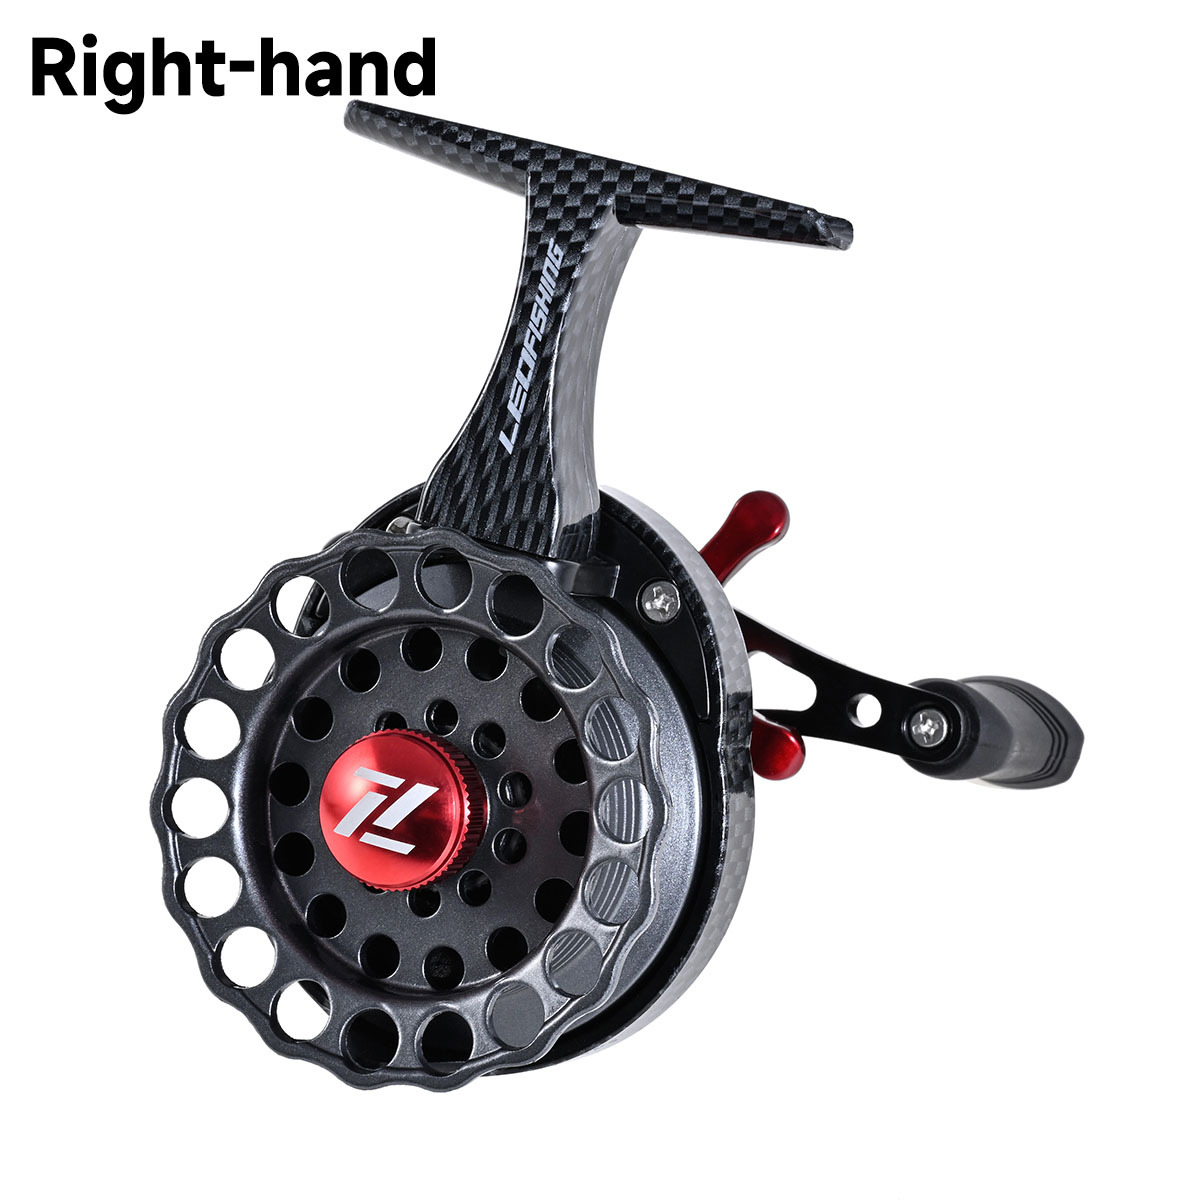  Crappie Reels Fishing Iron Reel Fishing Gear Iron Fishing  Wheel Fly Fishing Reel Iron Fly Reel Fishing Pole Outdoor Fishing Wheel  Accessories Front Hit Engineering Plastics : Sports & Outdoors